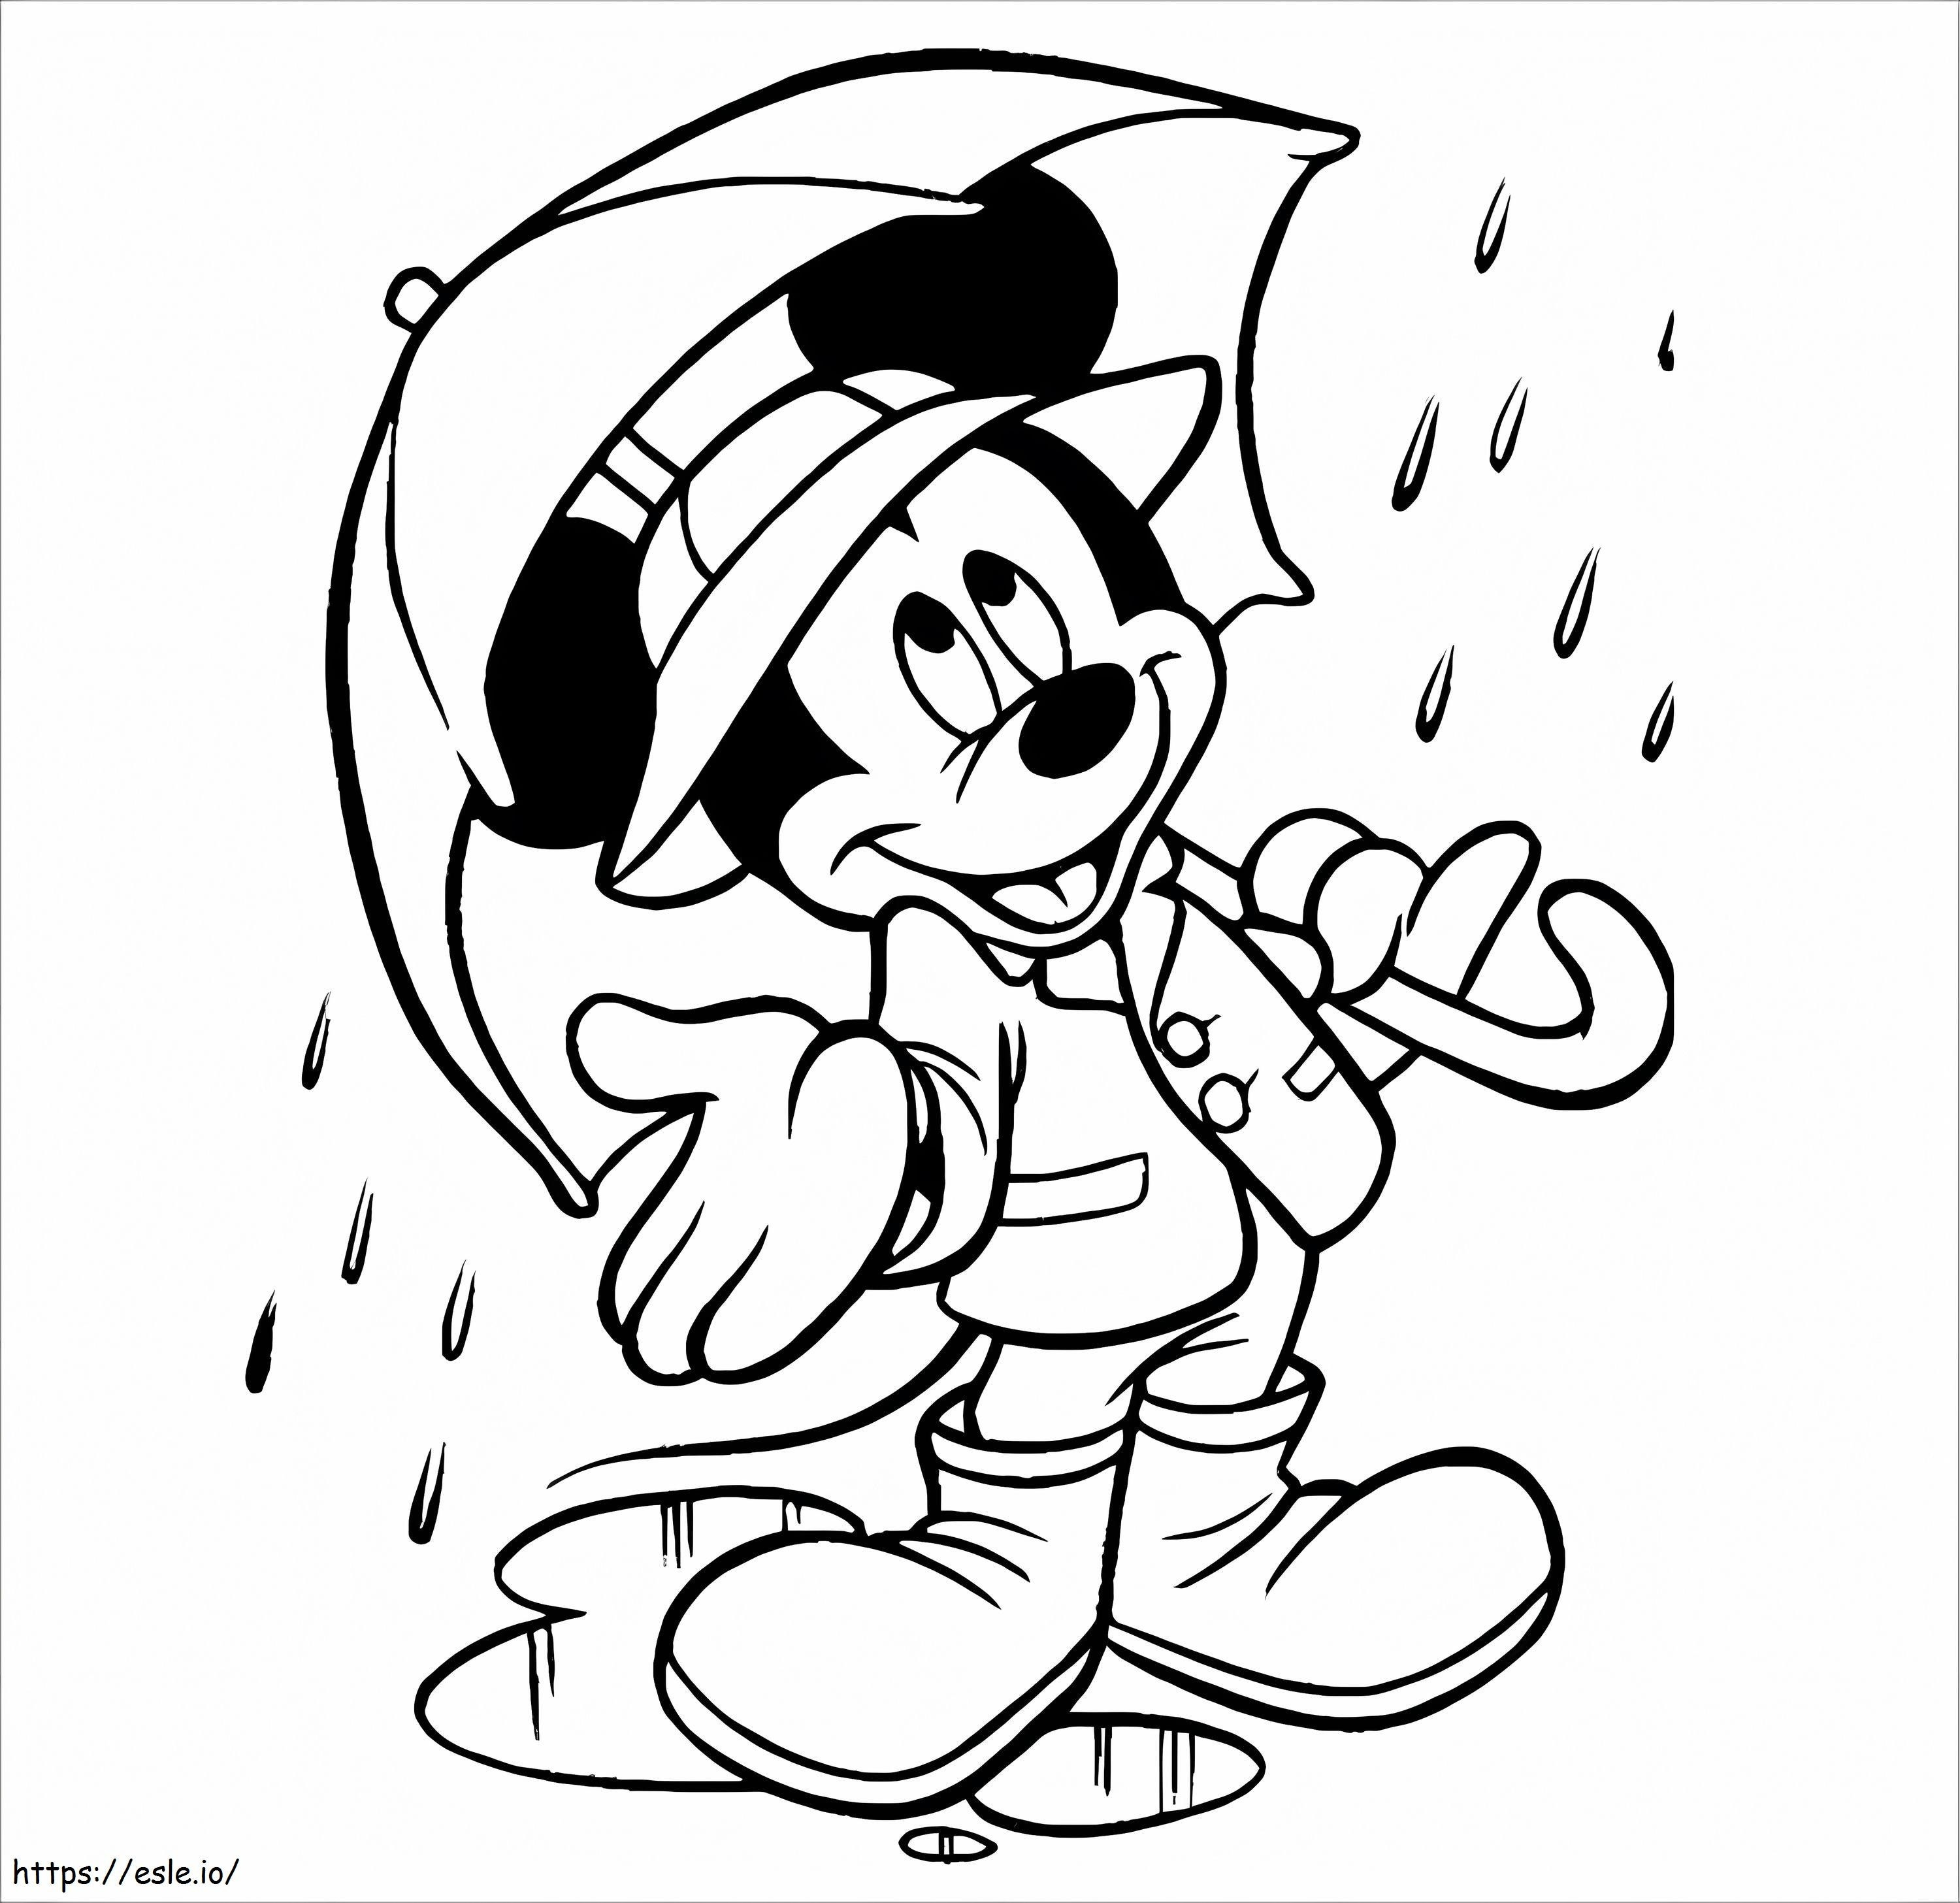 Mickey Mouse Holding An Umbrella In The Rain coloring page